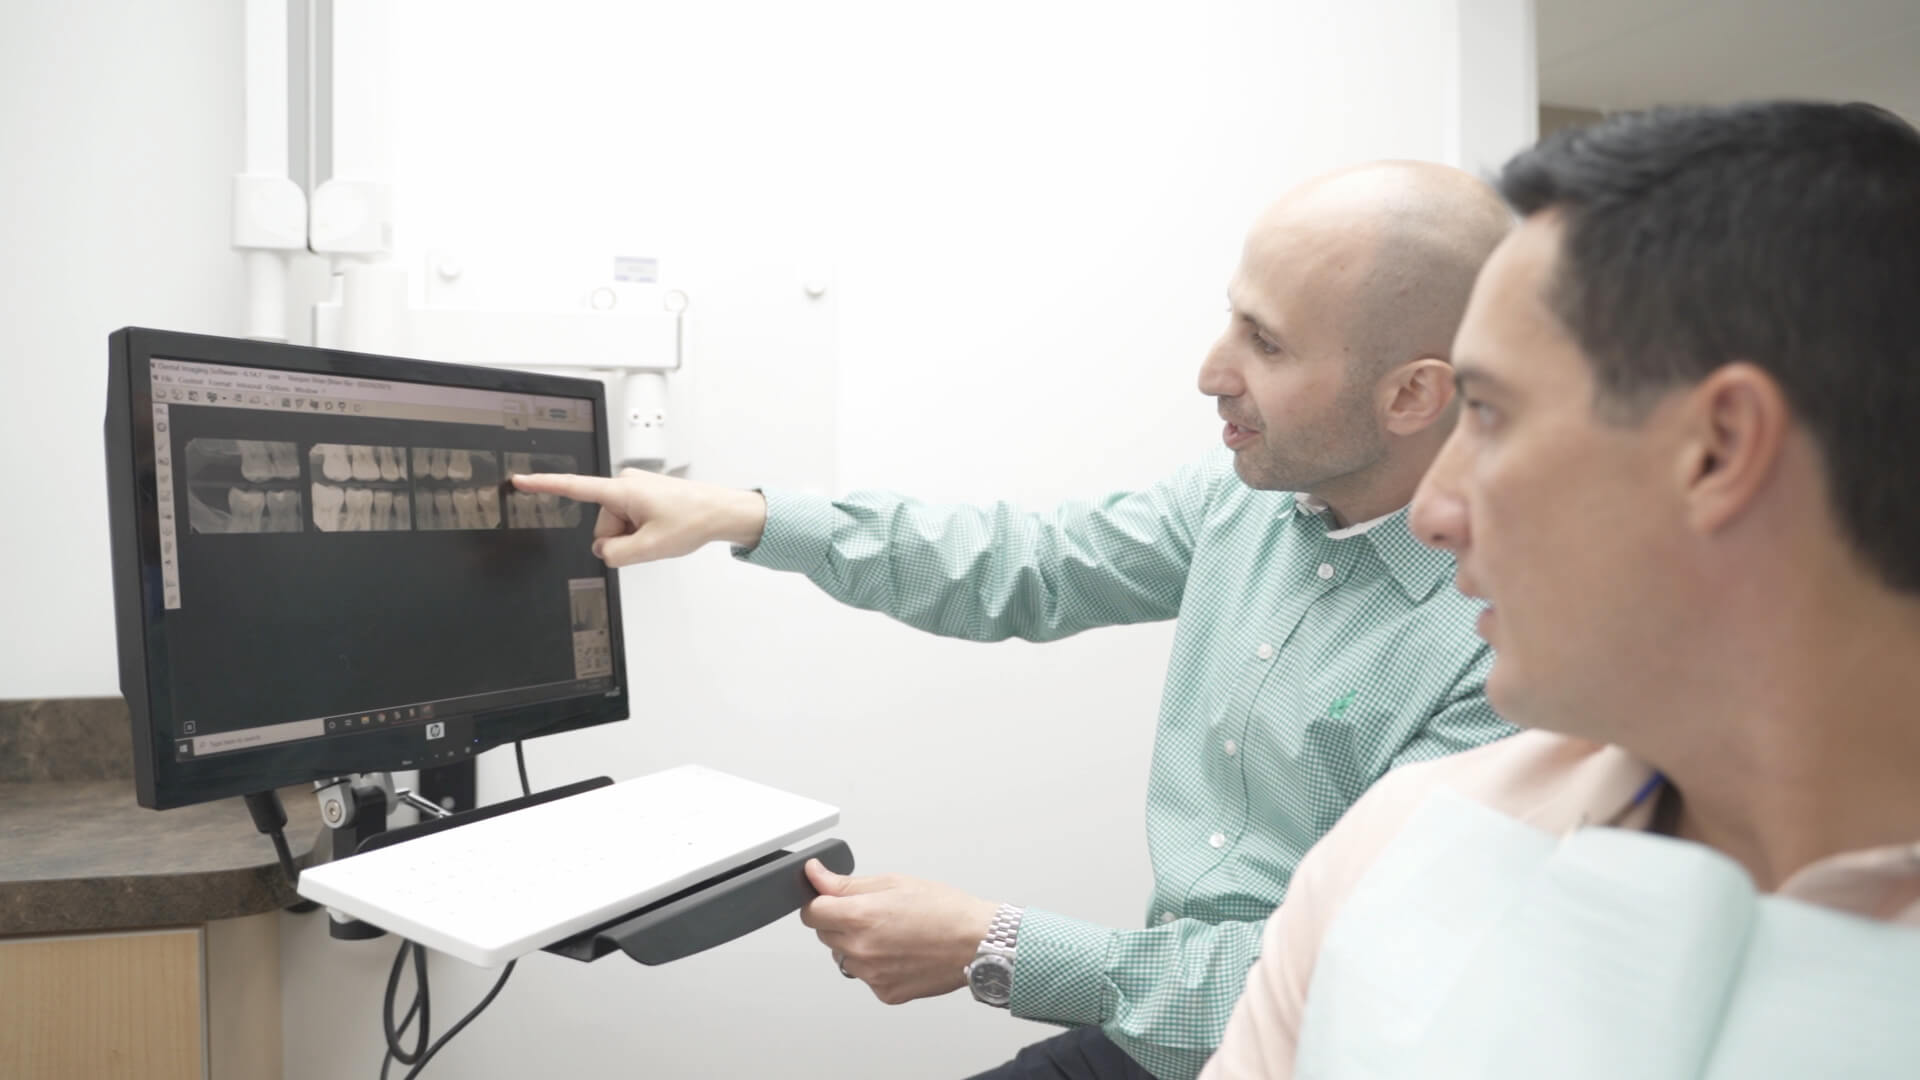 Dr. Dahman discussing an X-ray with a patient